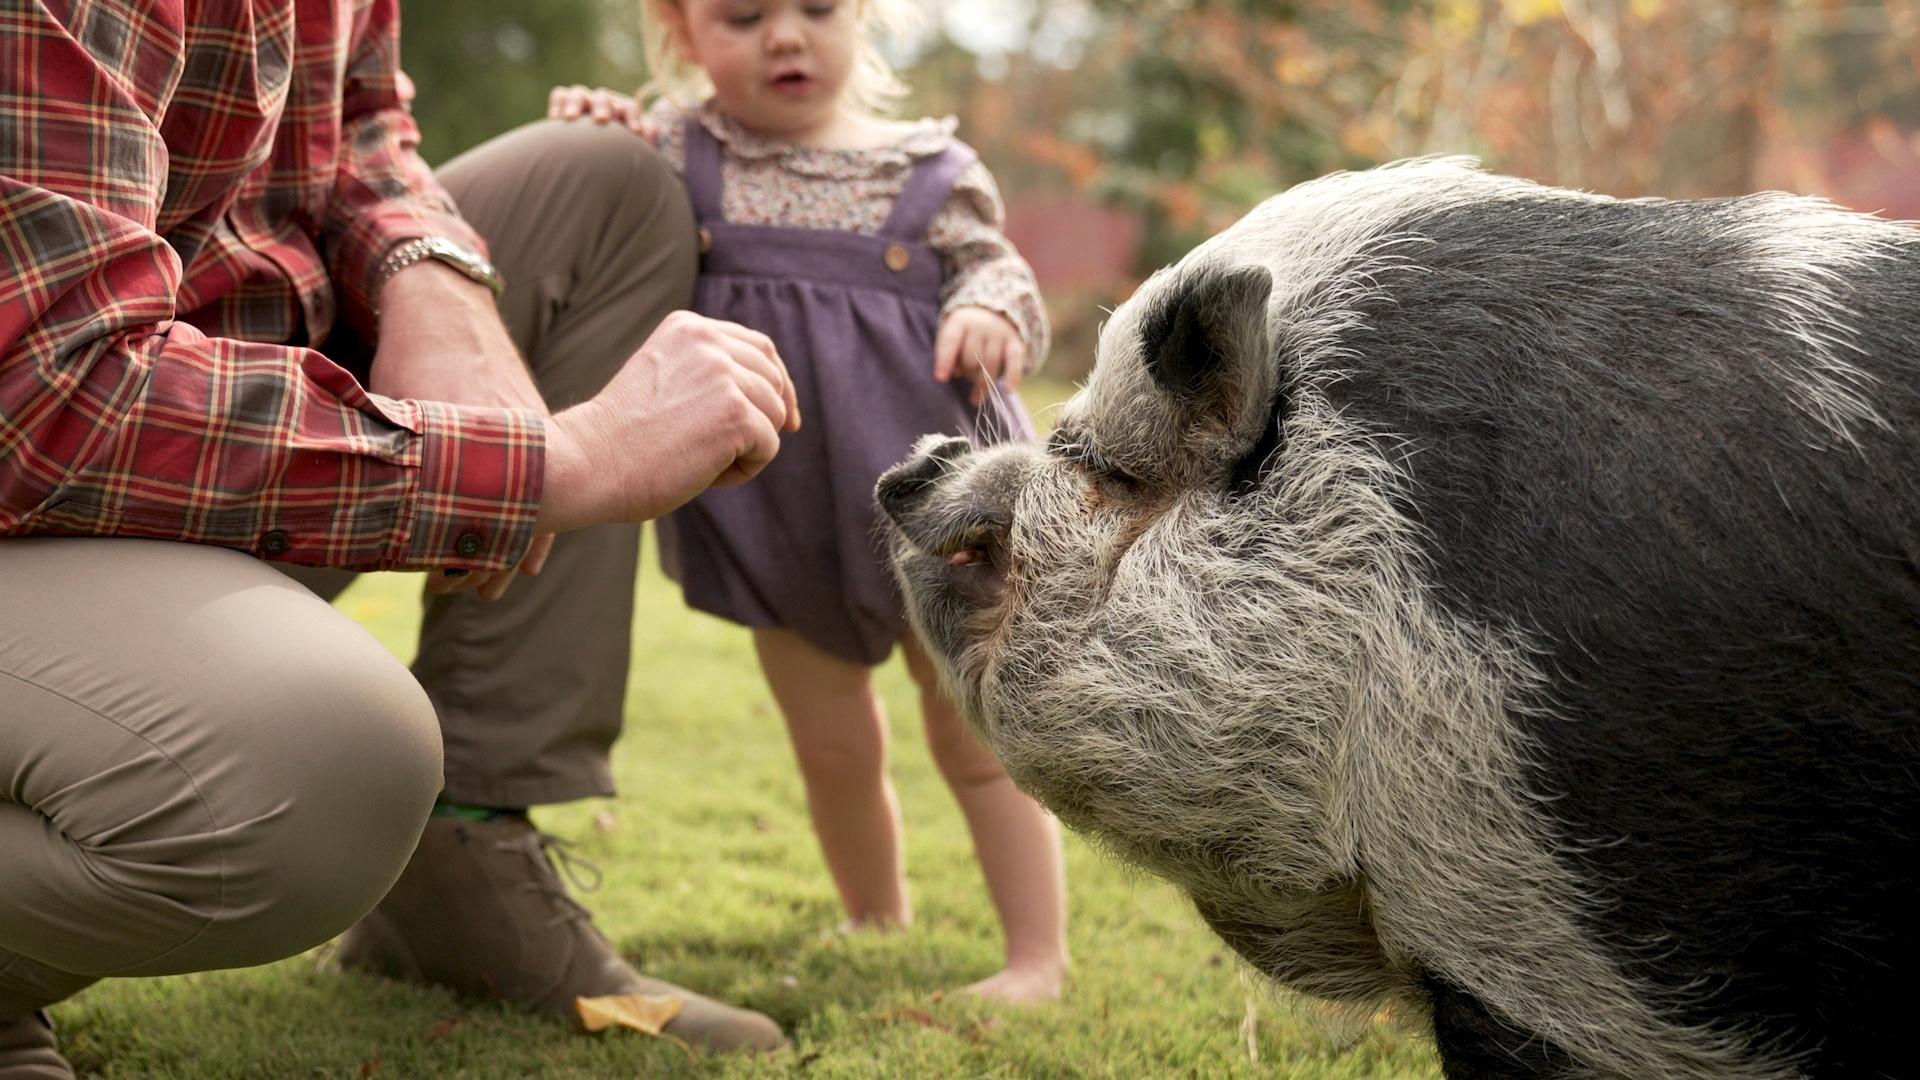 The North Carolina Hurricanes' unofficial mascot, Hamilton the Pig getting fed by his owner and a child.